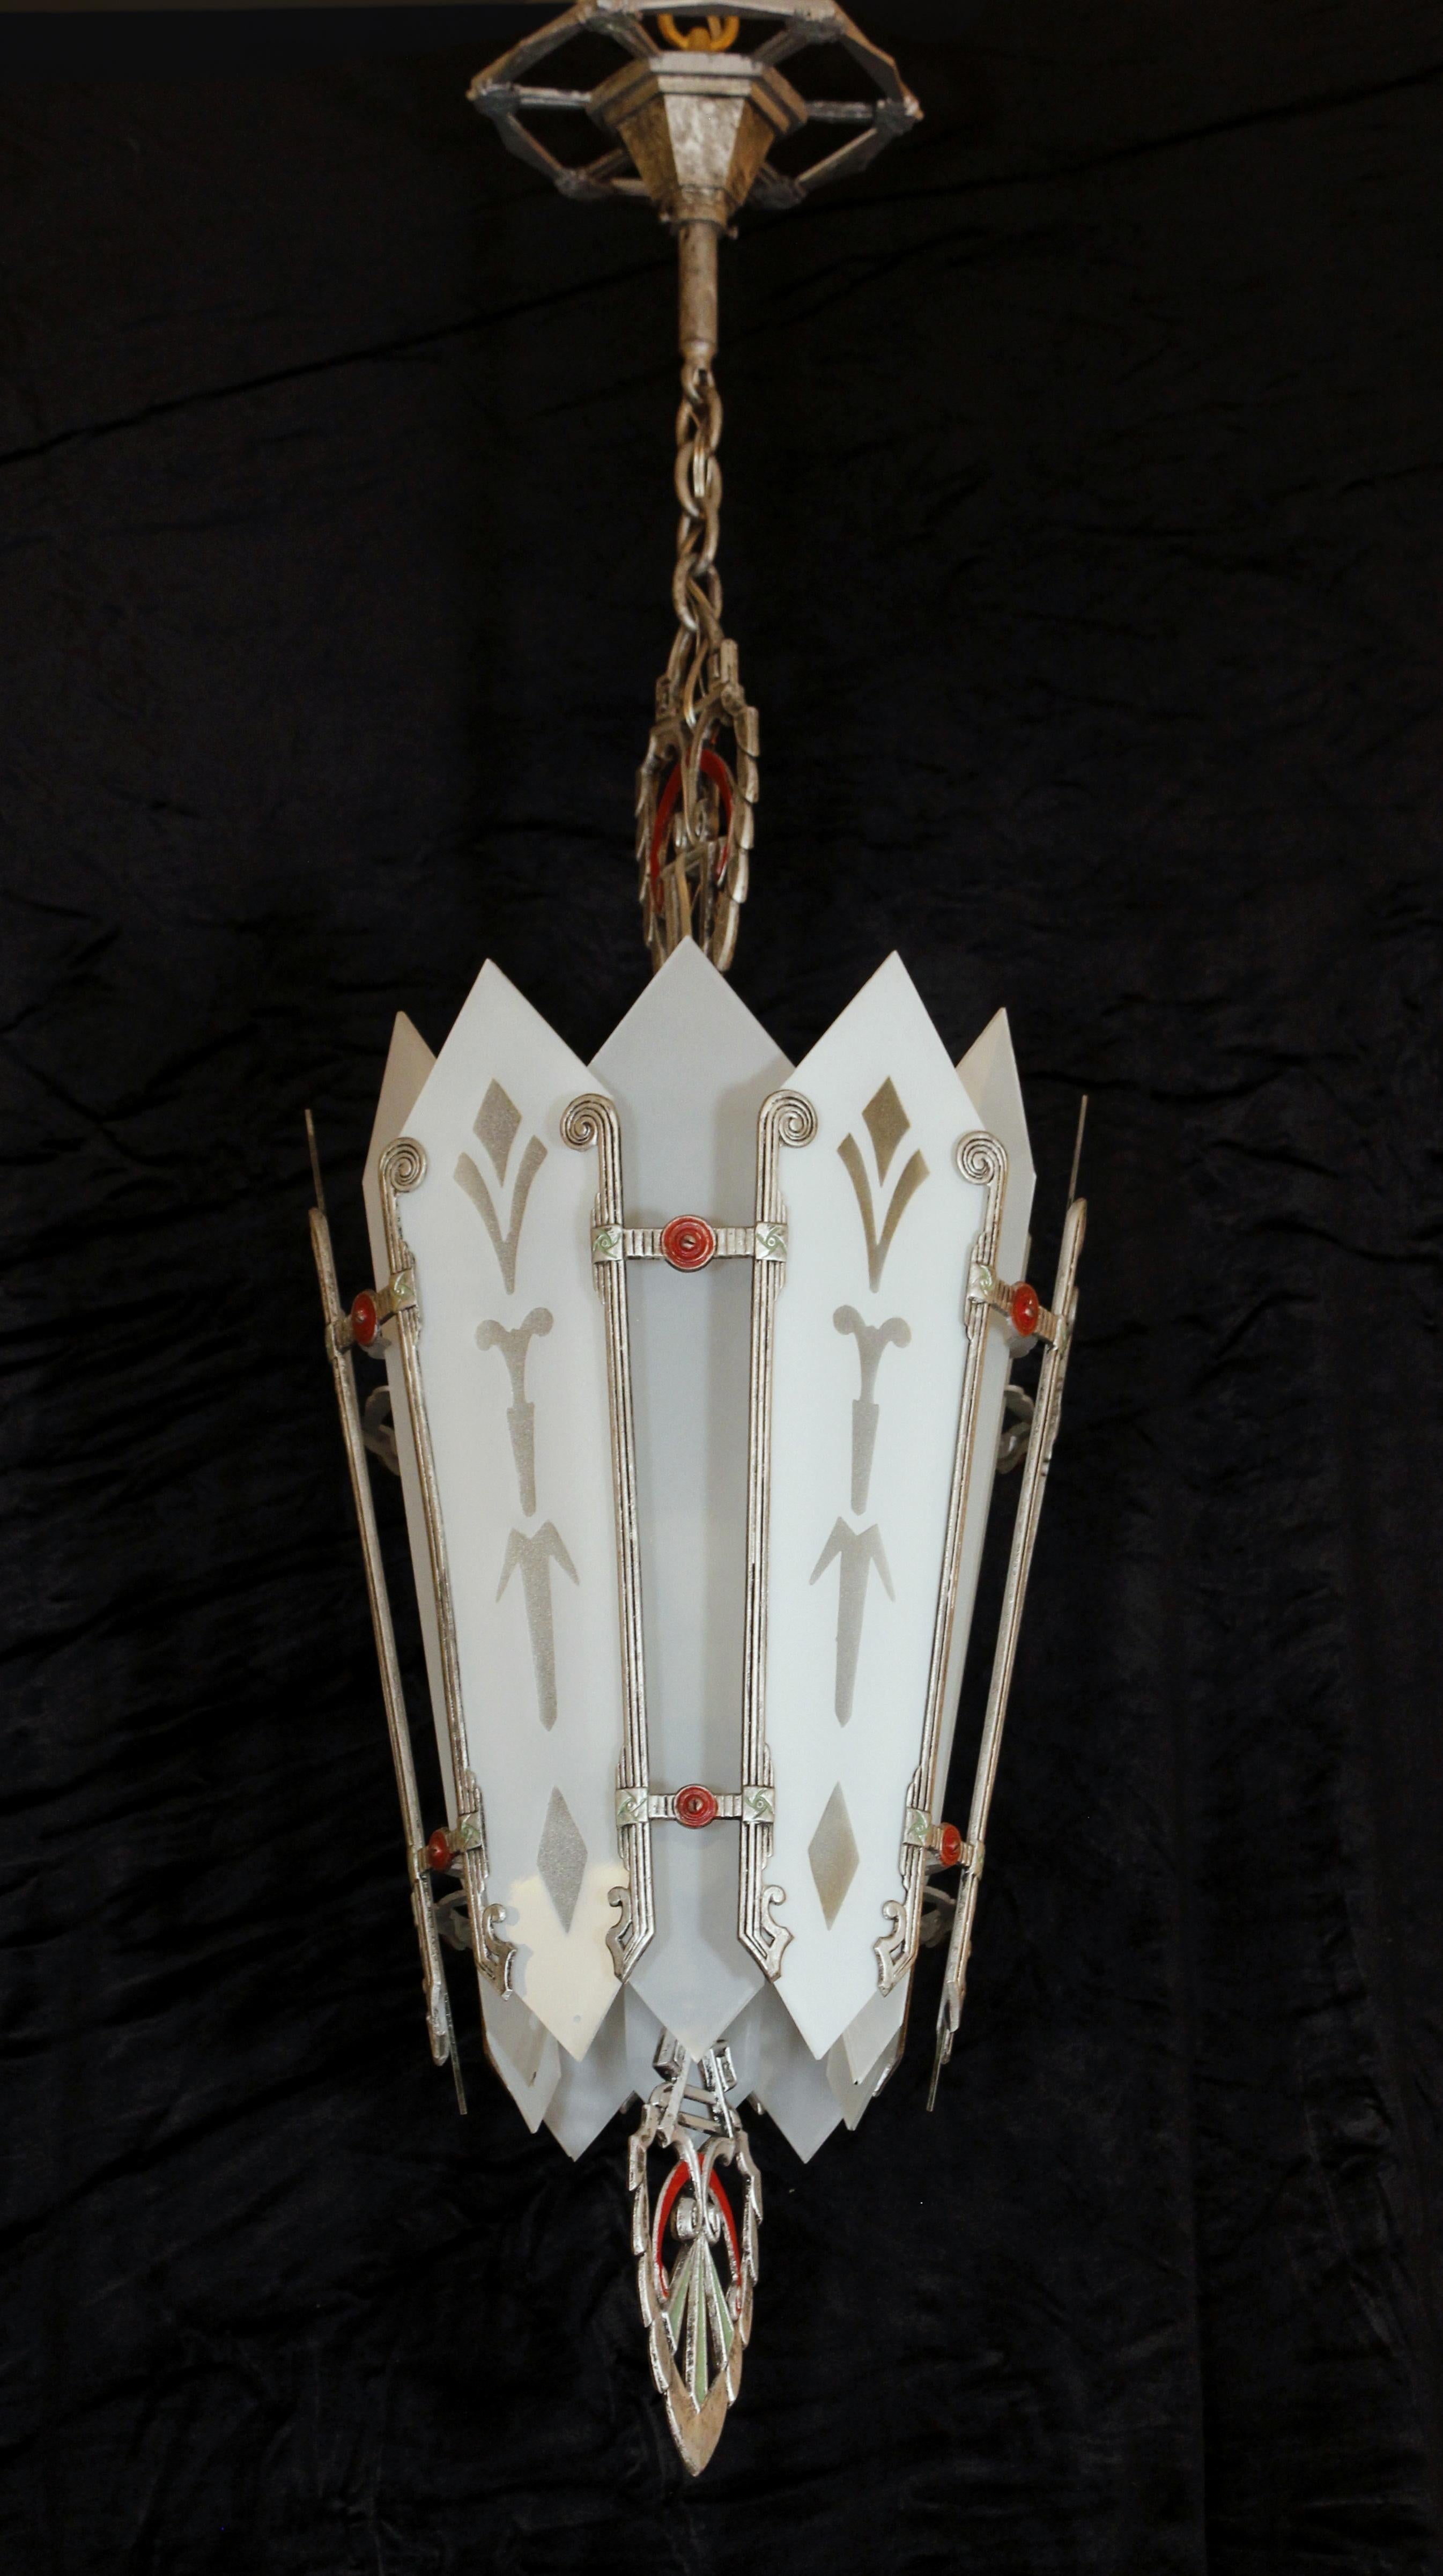 Retrieved from an establishment on the Shore Parkway in Brooklyn, NY. This original Art Deco pendant light comes with 6 rewired sockets and features the original etched glass shade panels. Polychrome aluminum frame. Please note, this item is located